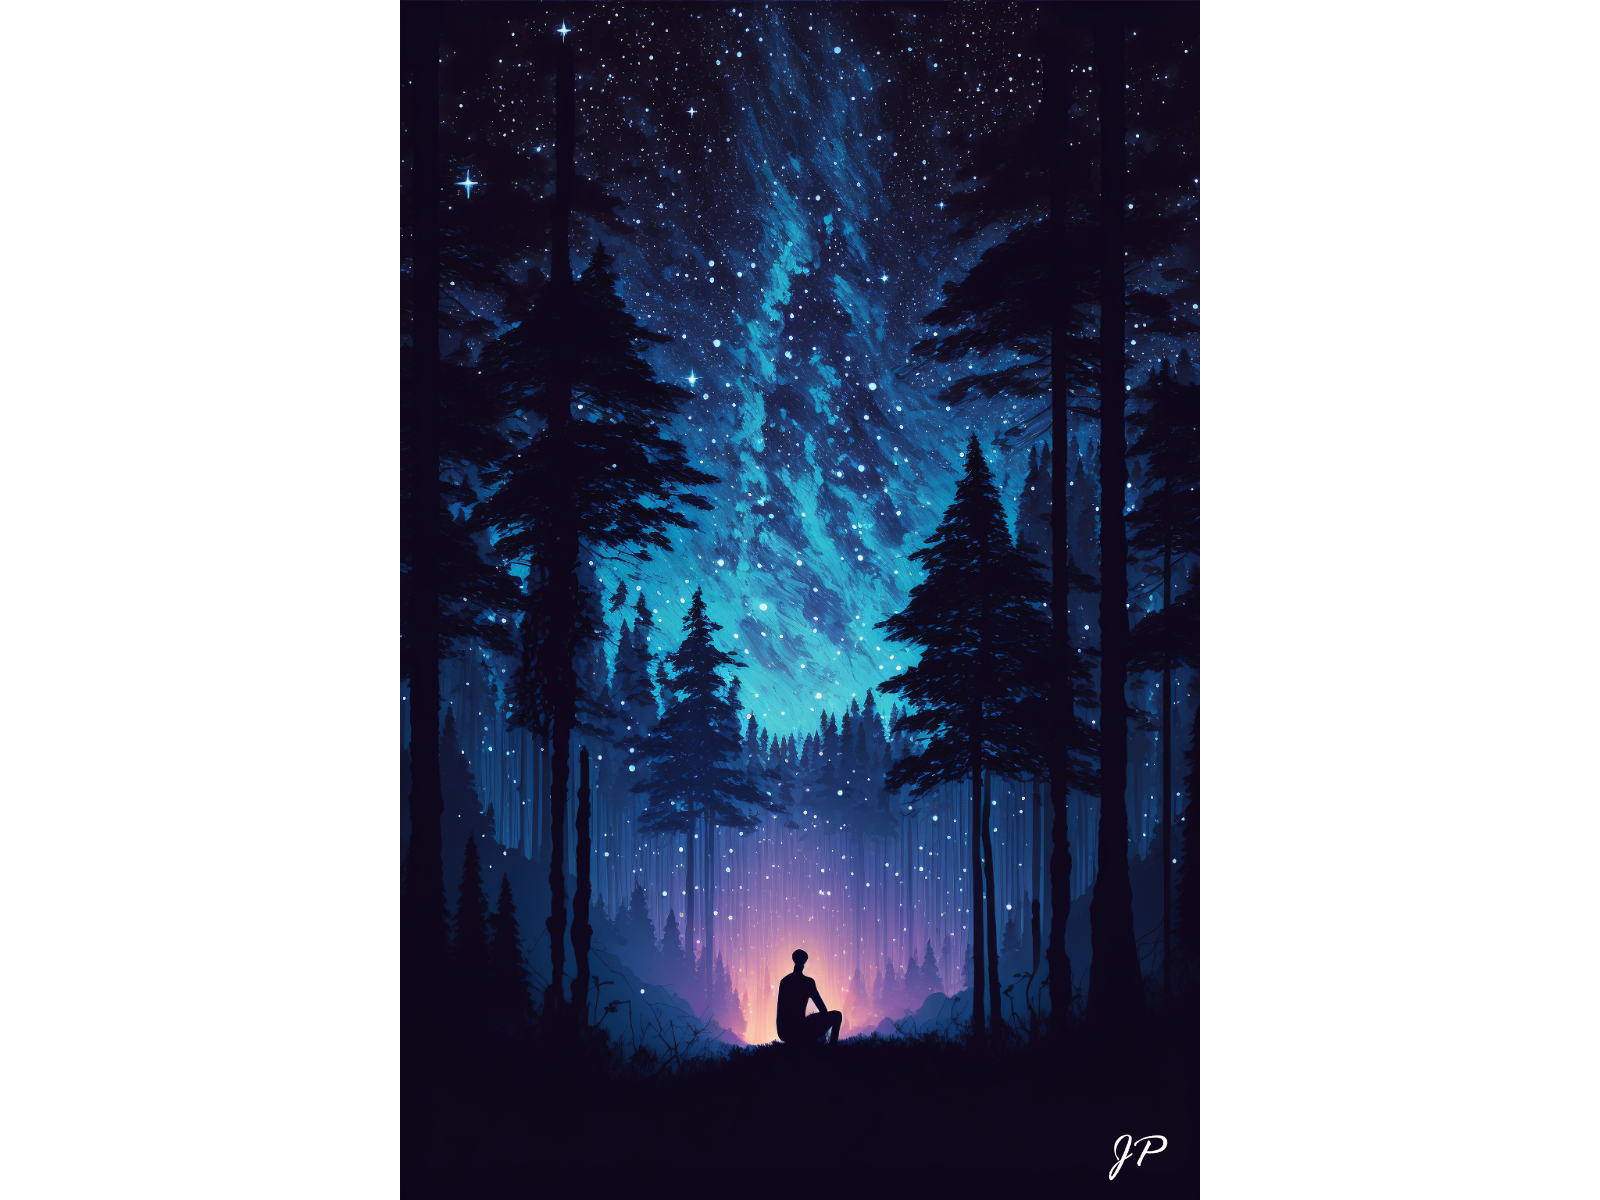 Night Forest by ai_ceberg on Dribbble